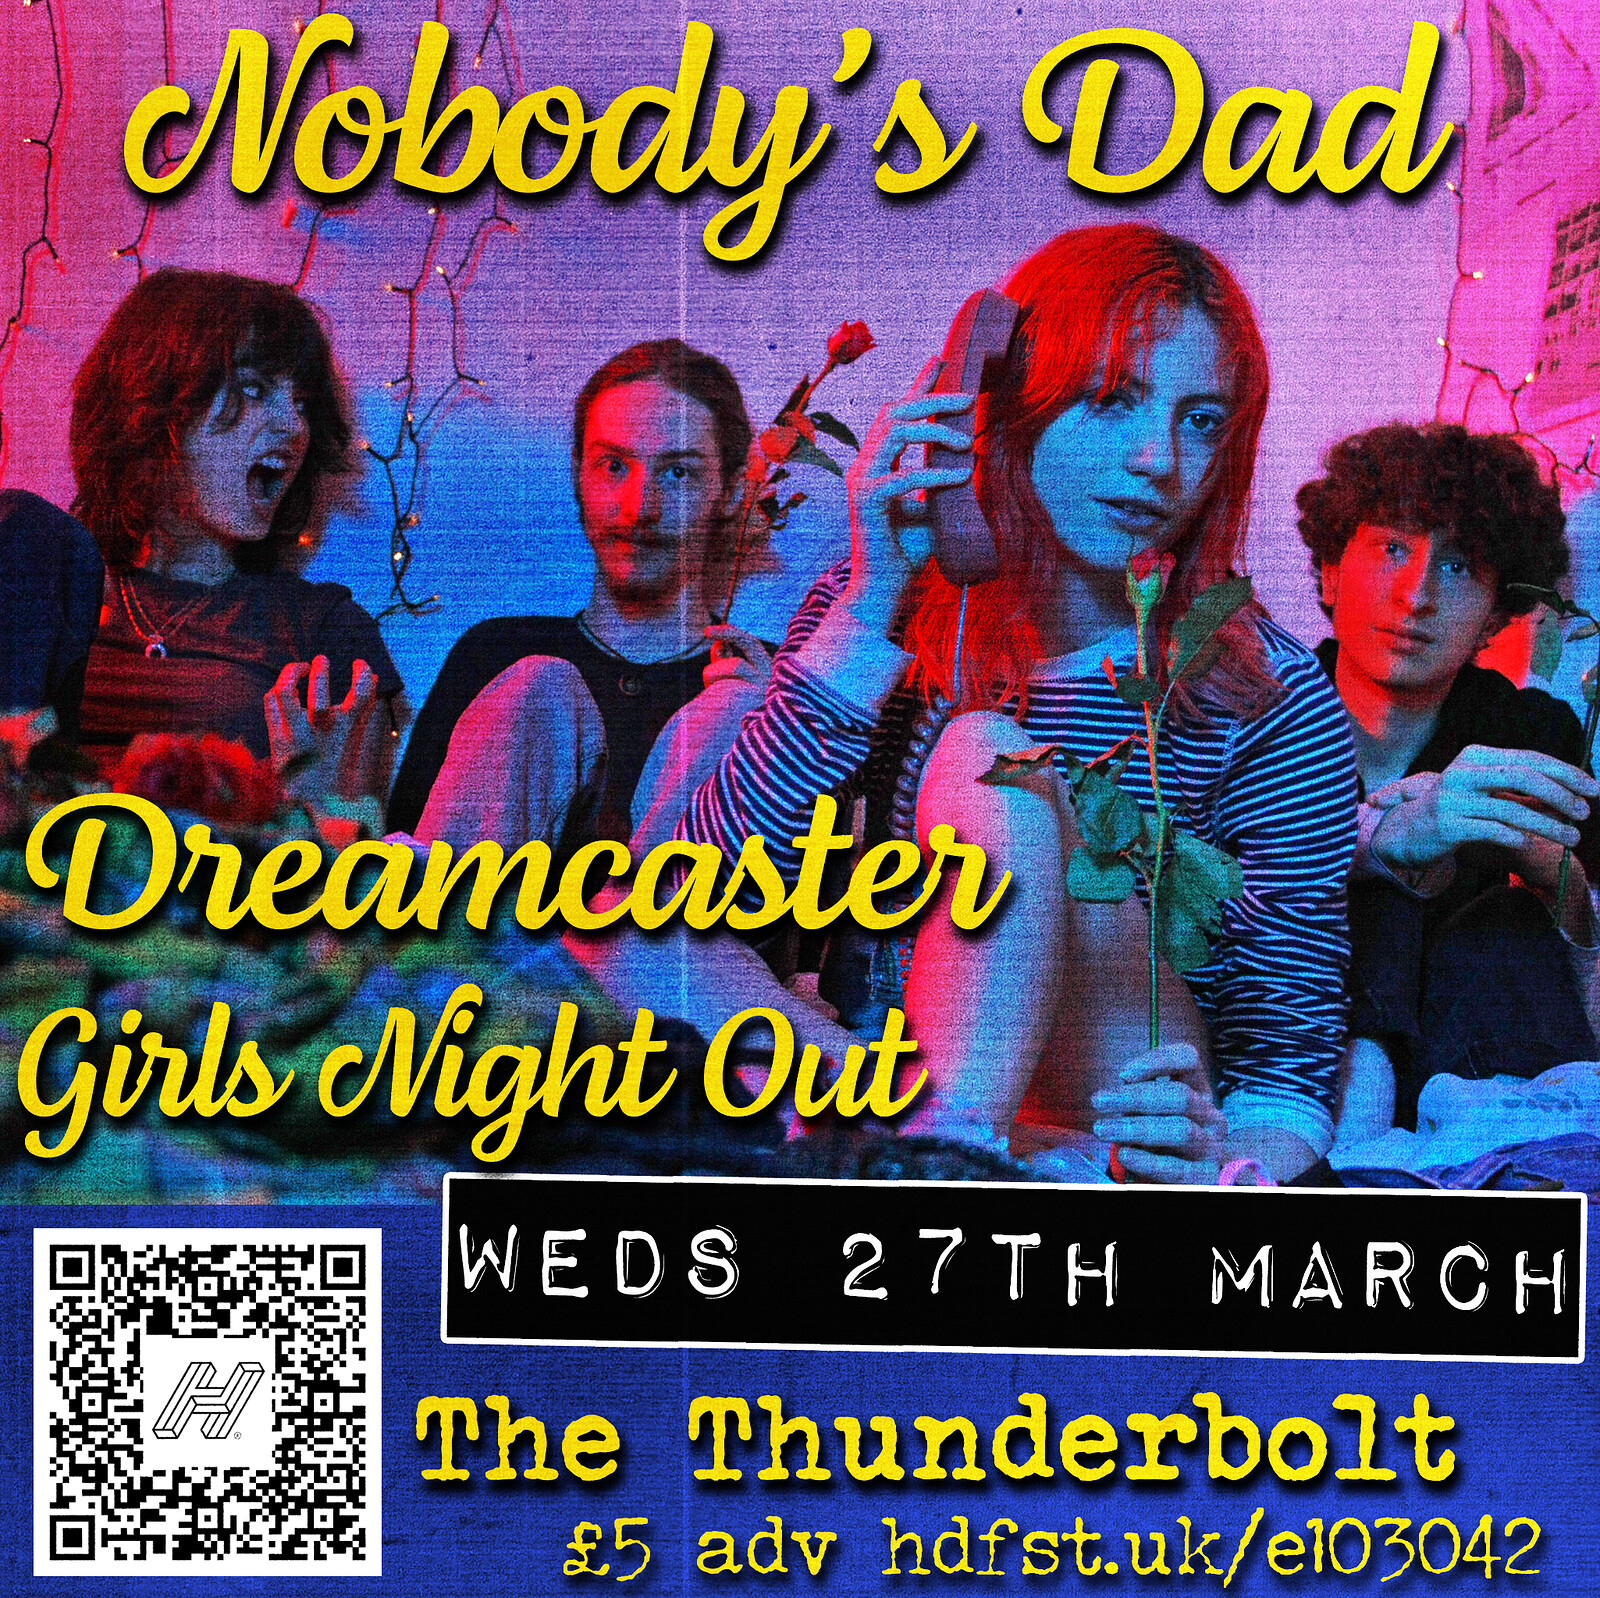 Nobody's Dad + Dreamcaster + Girls Night Out at The Thunderbolt